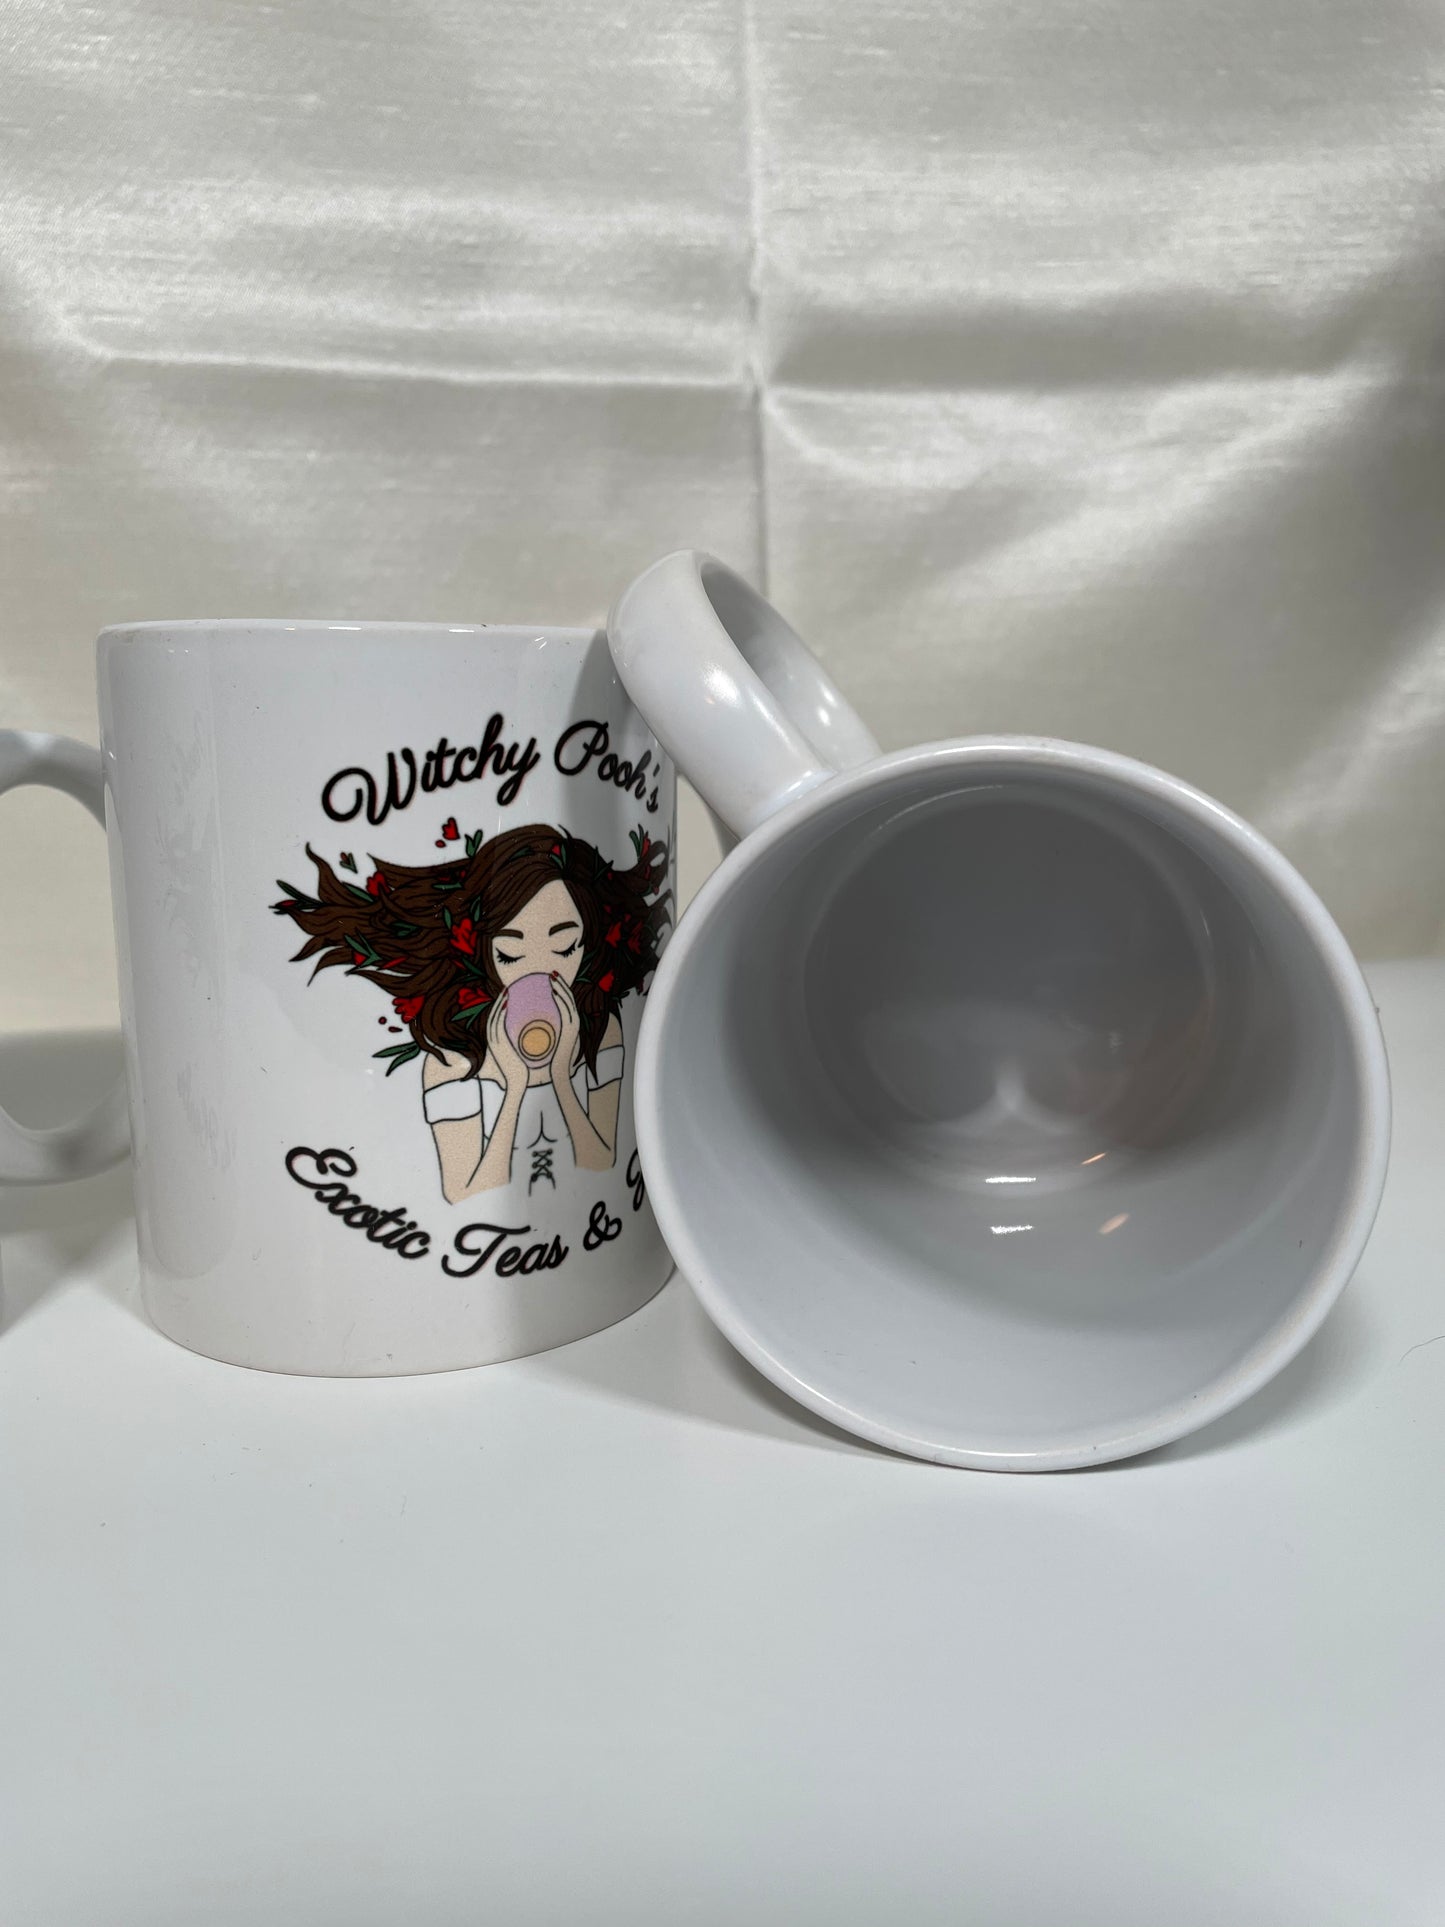 Witchy Pooh's Mugs, White Coffee Cup with The Witchy Pooh Logo